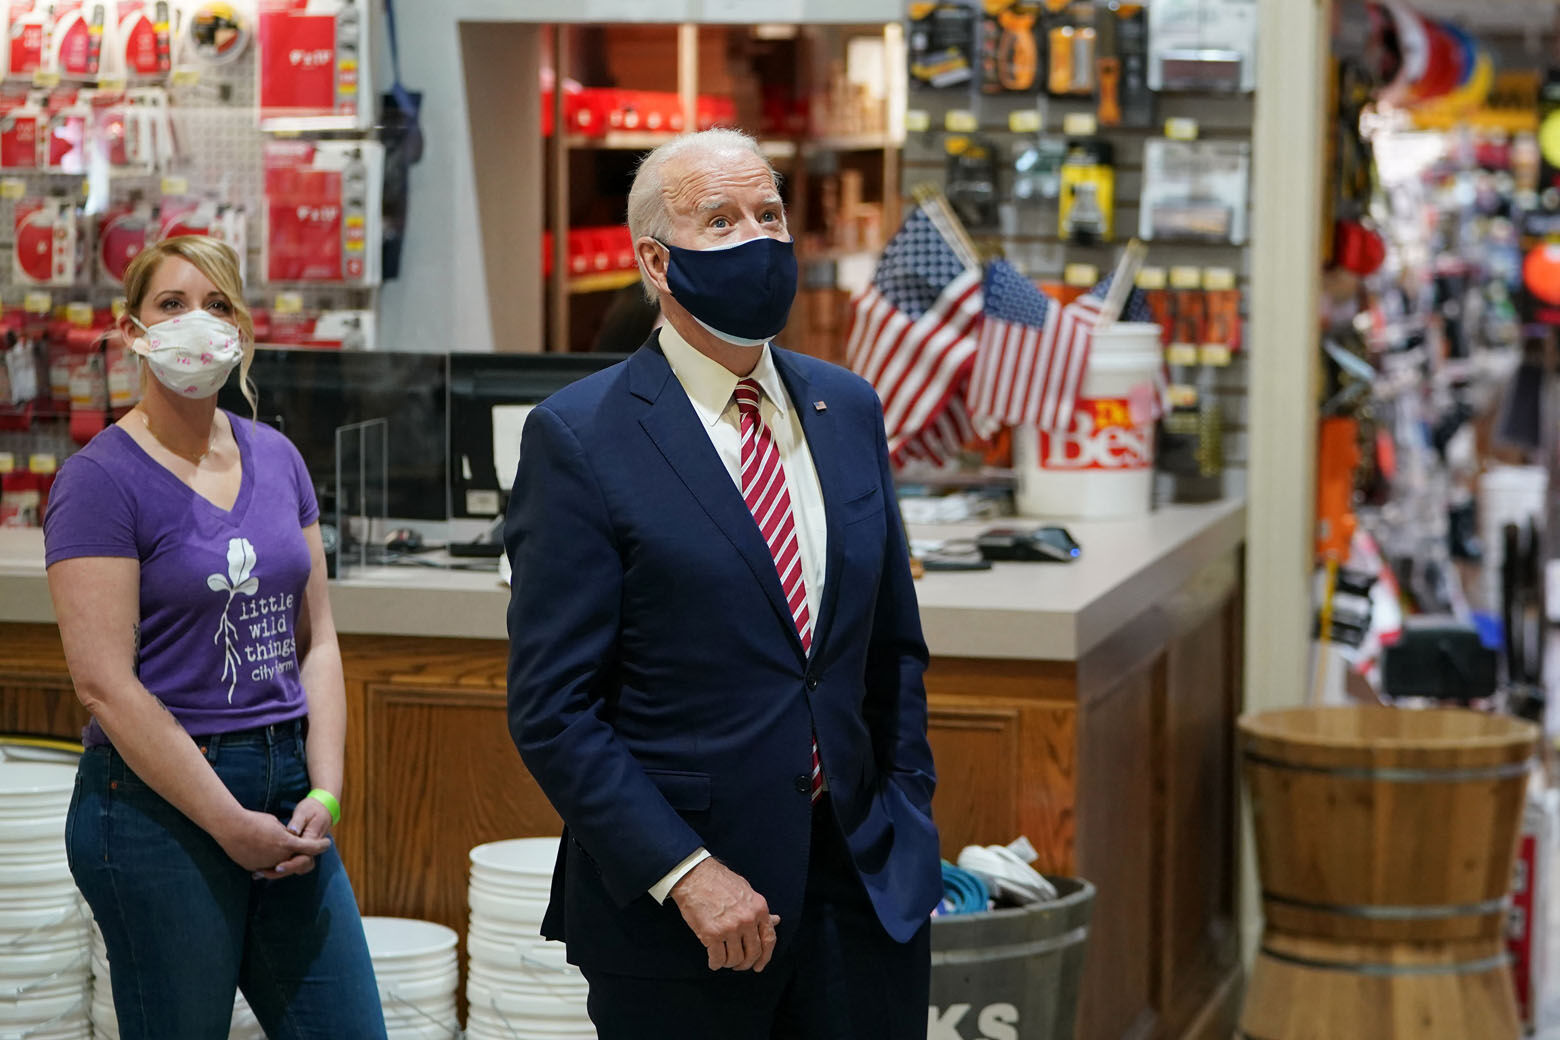 <p>US President Joe Biden stands with Mary Anna Ackley (L), owner of Little Wild Things Farm, a business next door to Jenks &amp; Son, both benefiting from the PPP loan, as he visits inside W.S. Jenks &amp; Son, a hardware store in Washington, DC, on March 9, 2021.</p>
